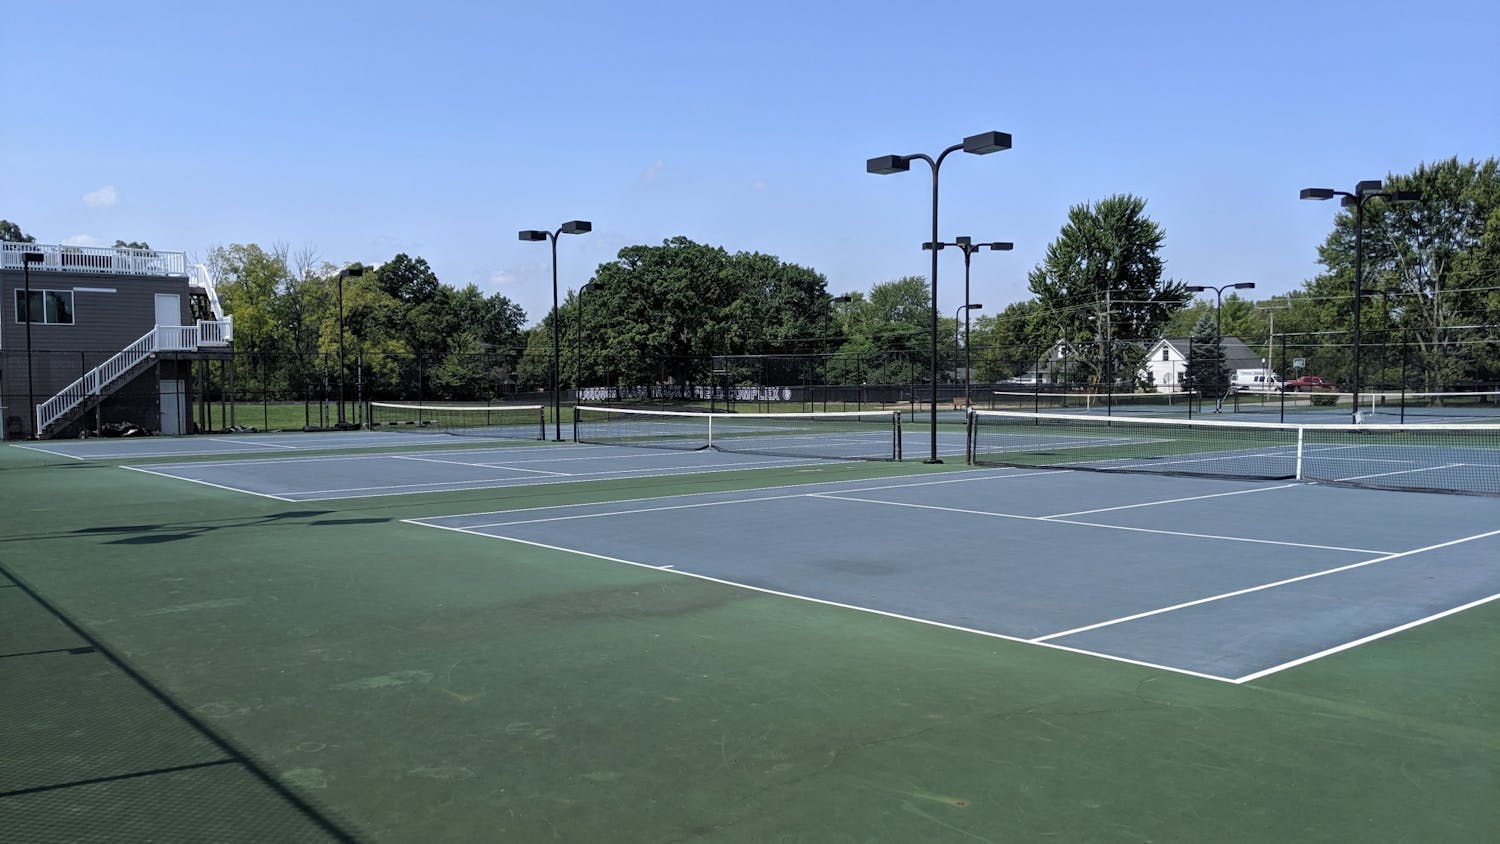 The tennis courts at Taylor didn't stay empty for long